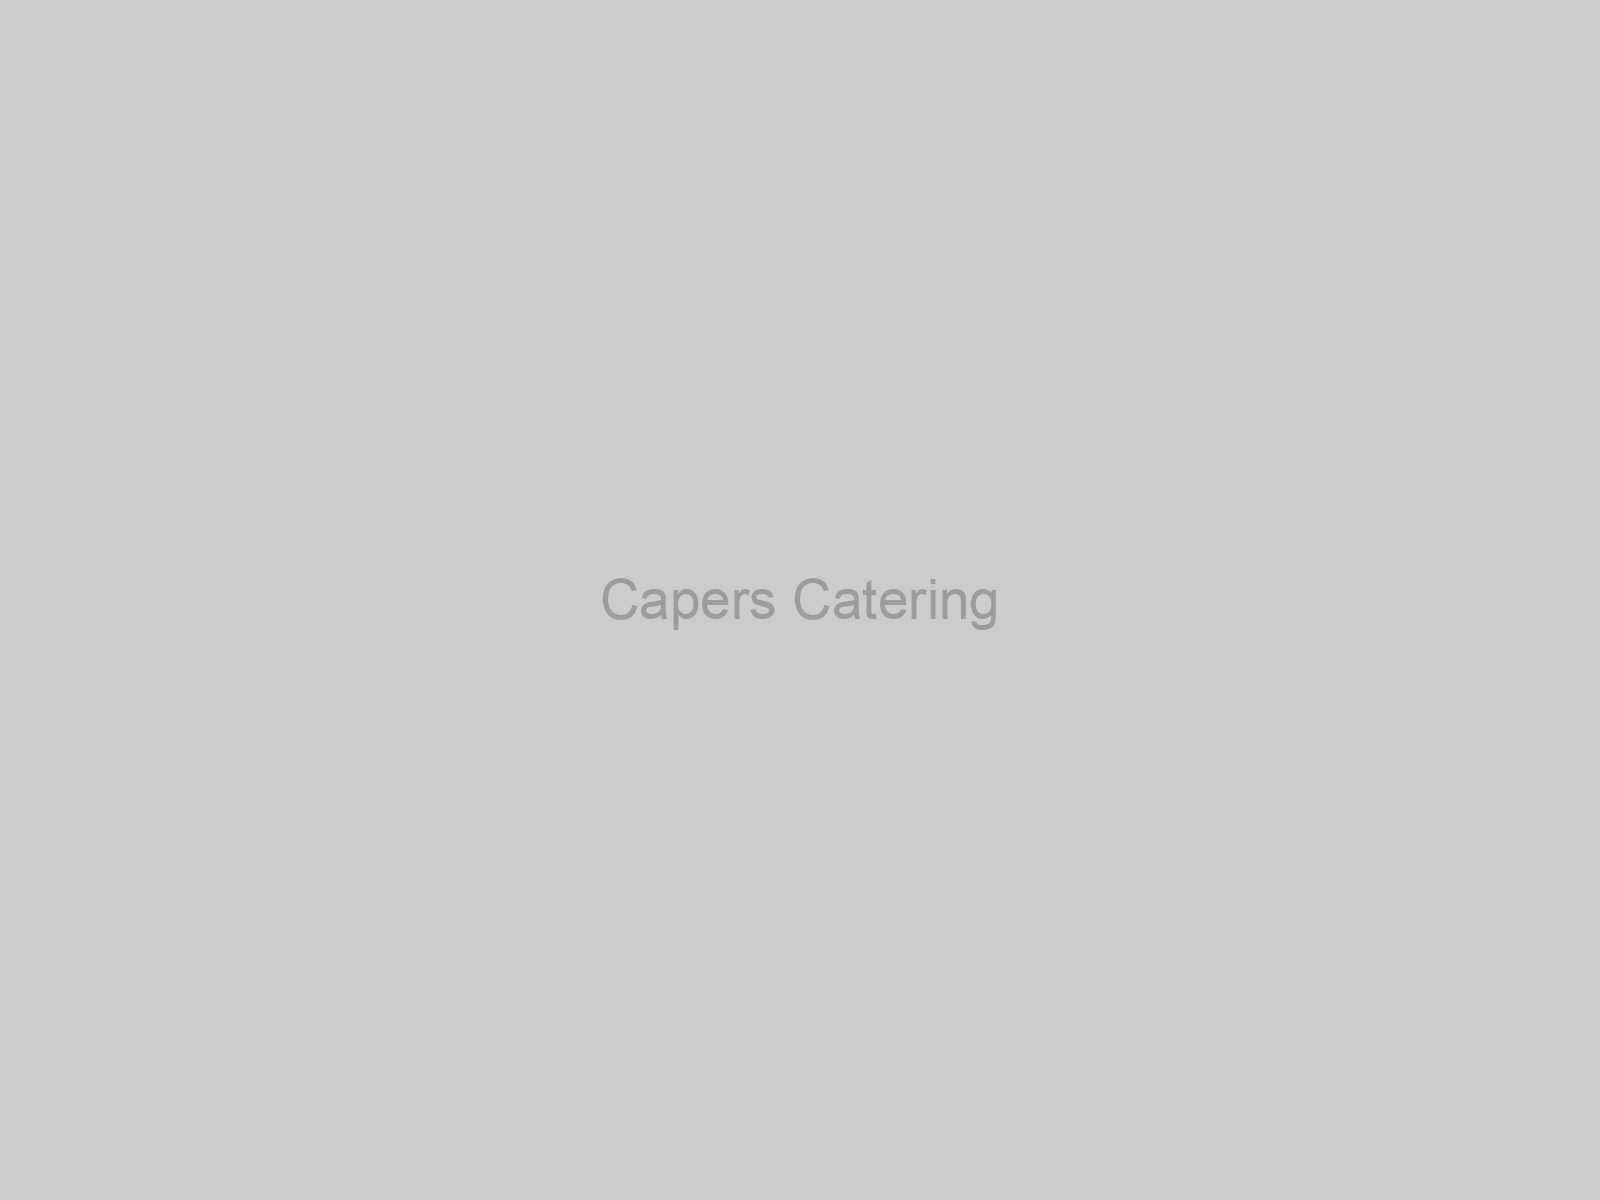 Capers Catering